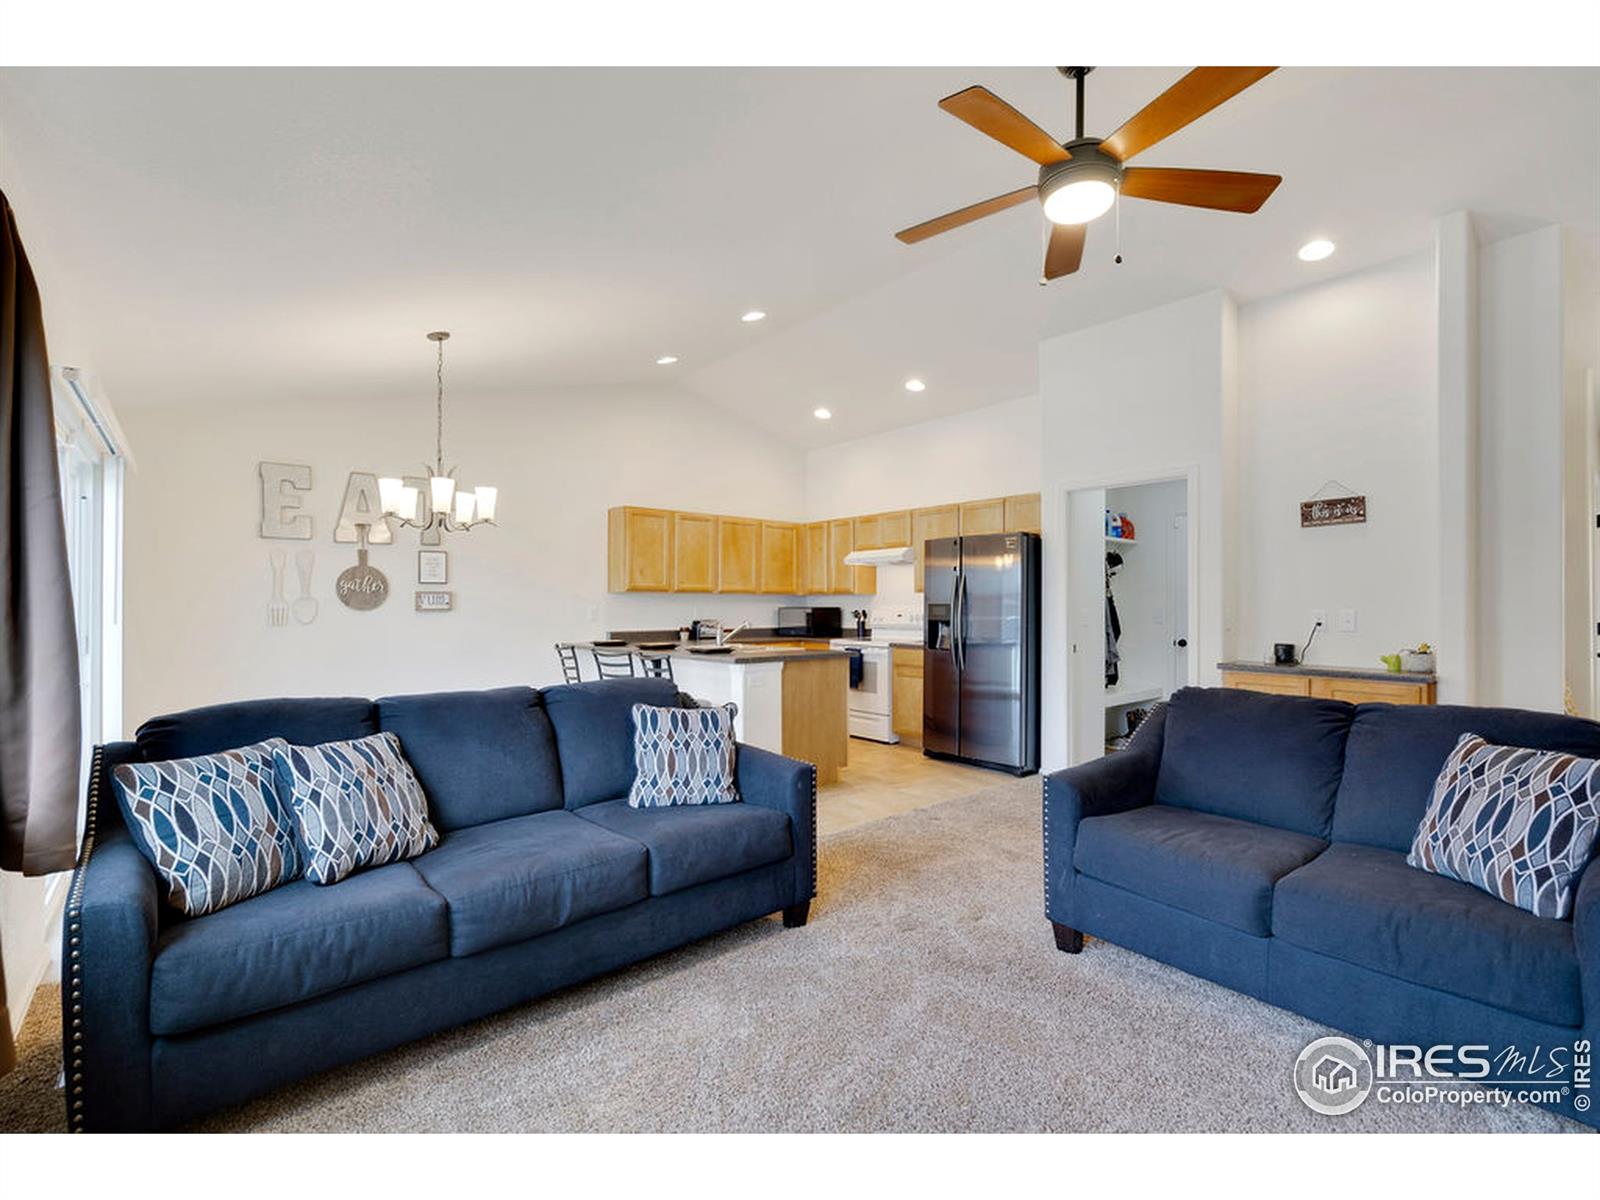 1308 88th, Greeley, CO